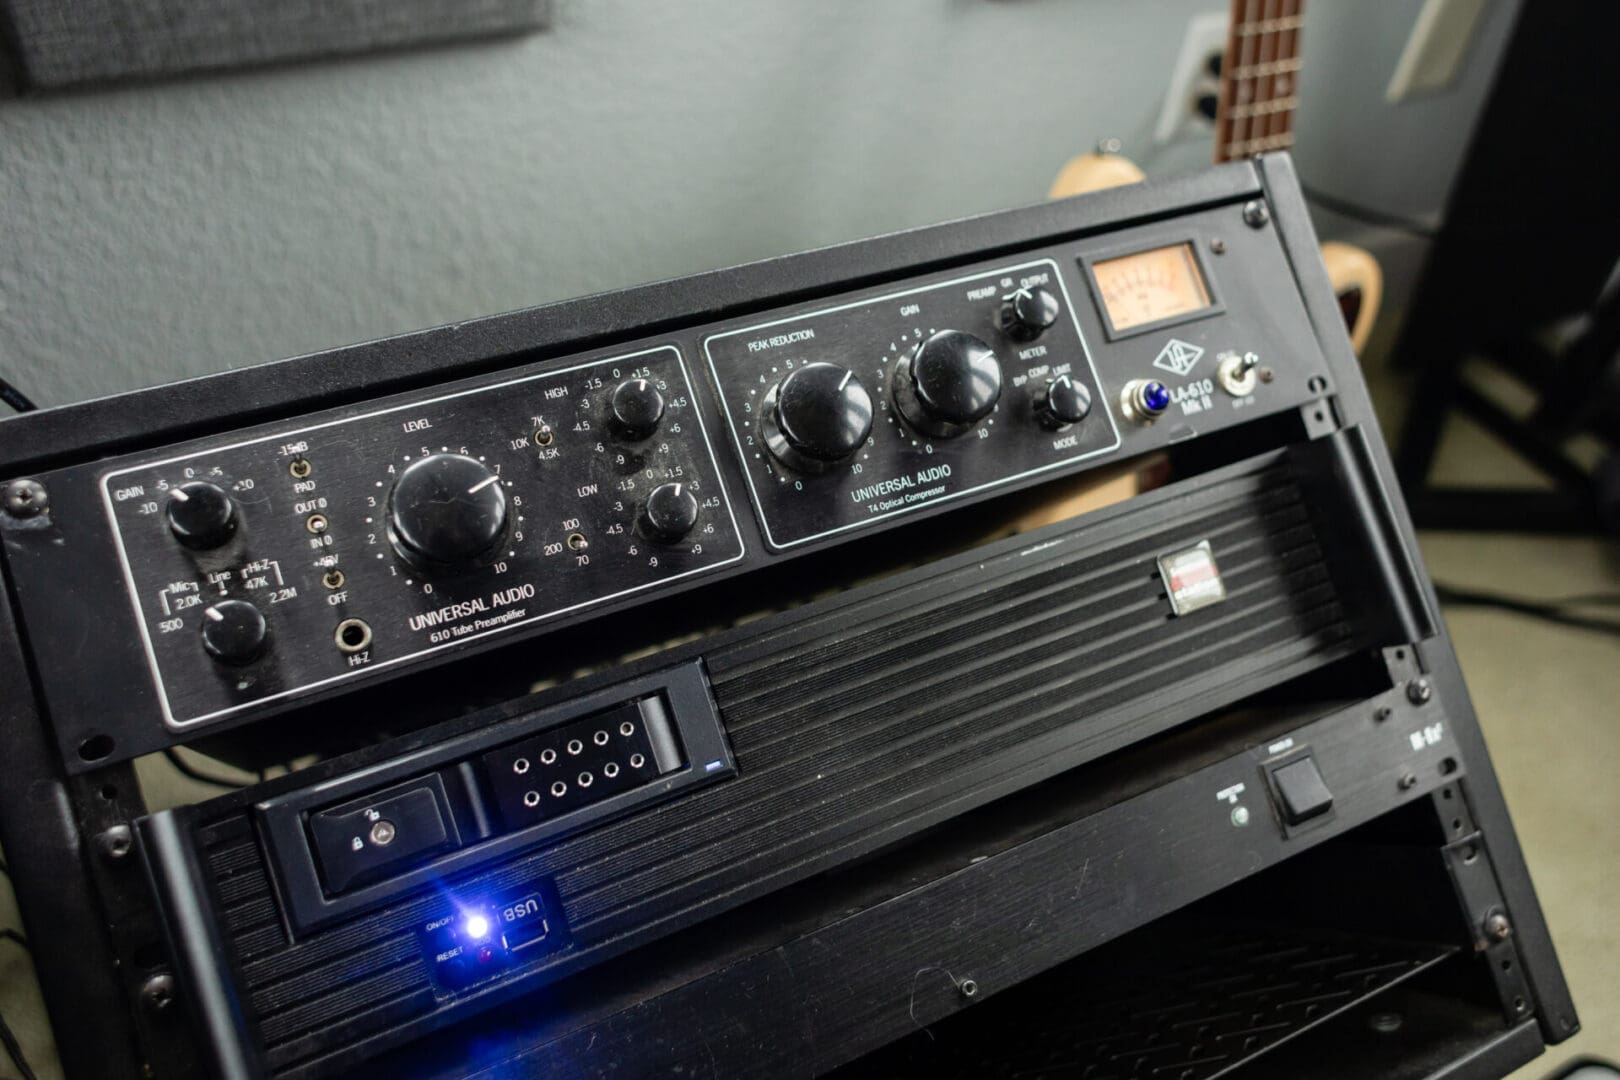 A black and silver stereo system with blue light.